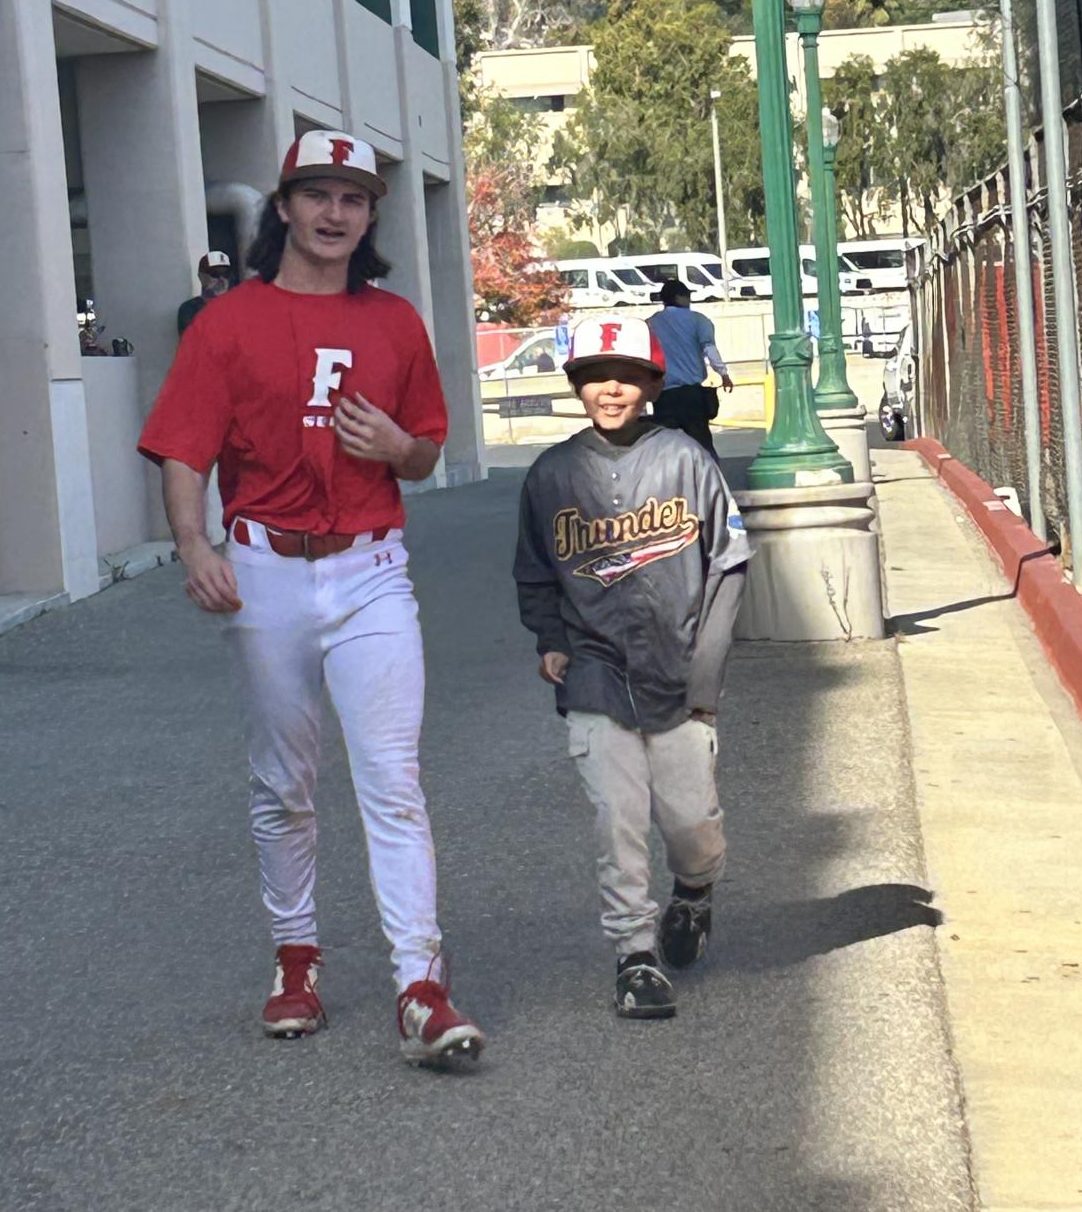 David (left) walks with Easton (right) at the baseball field. 